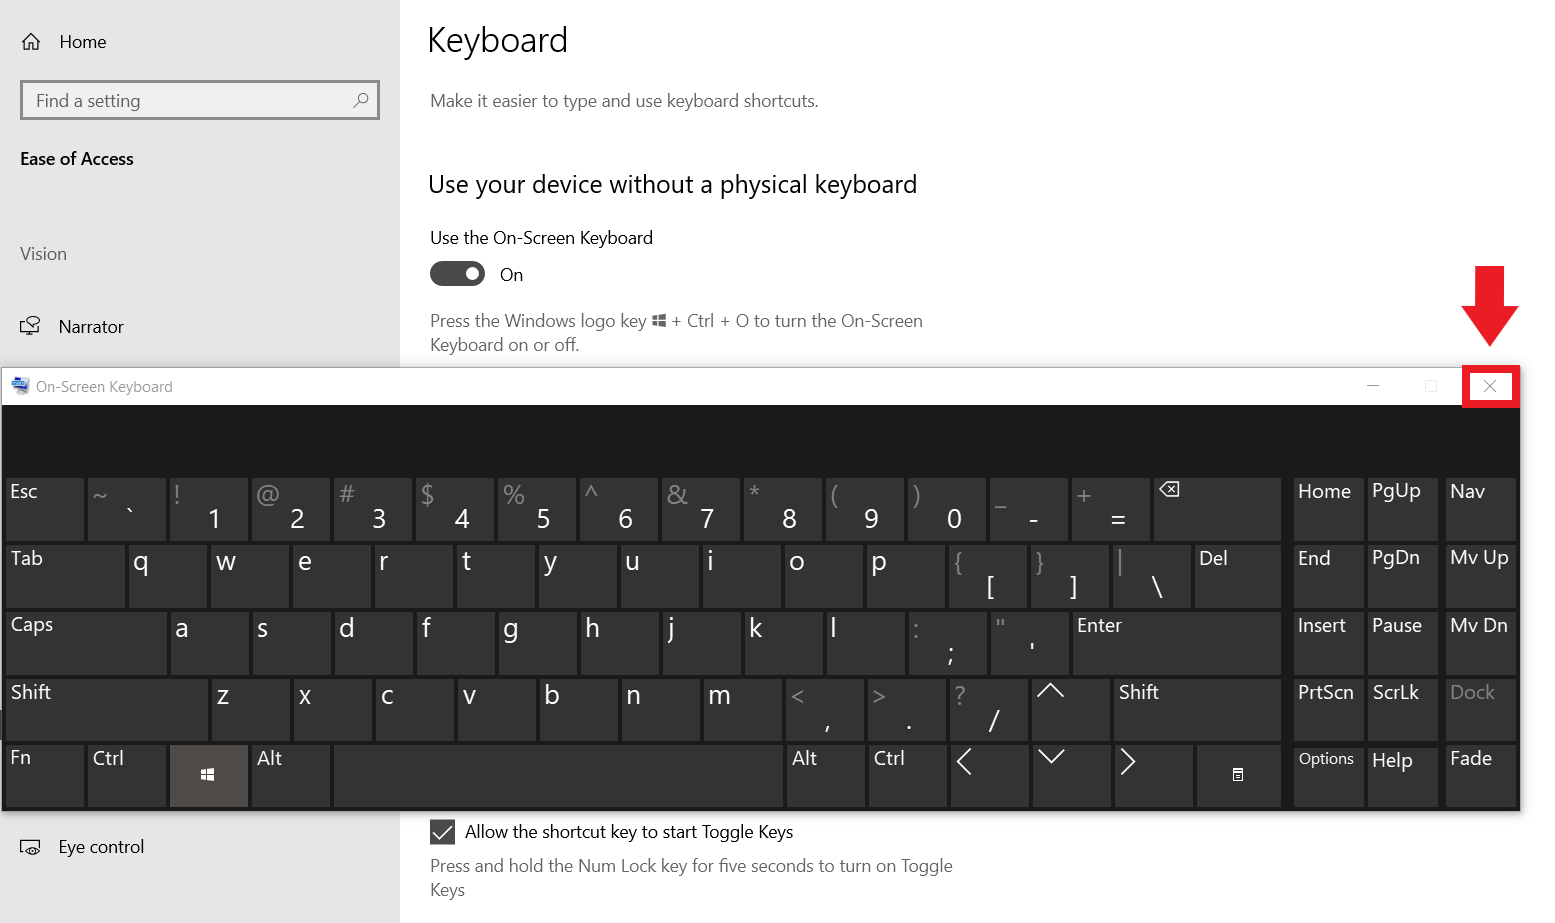 Close the keyboard with the “x” in the upper right corner